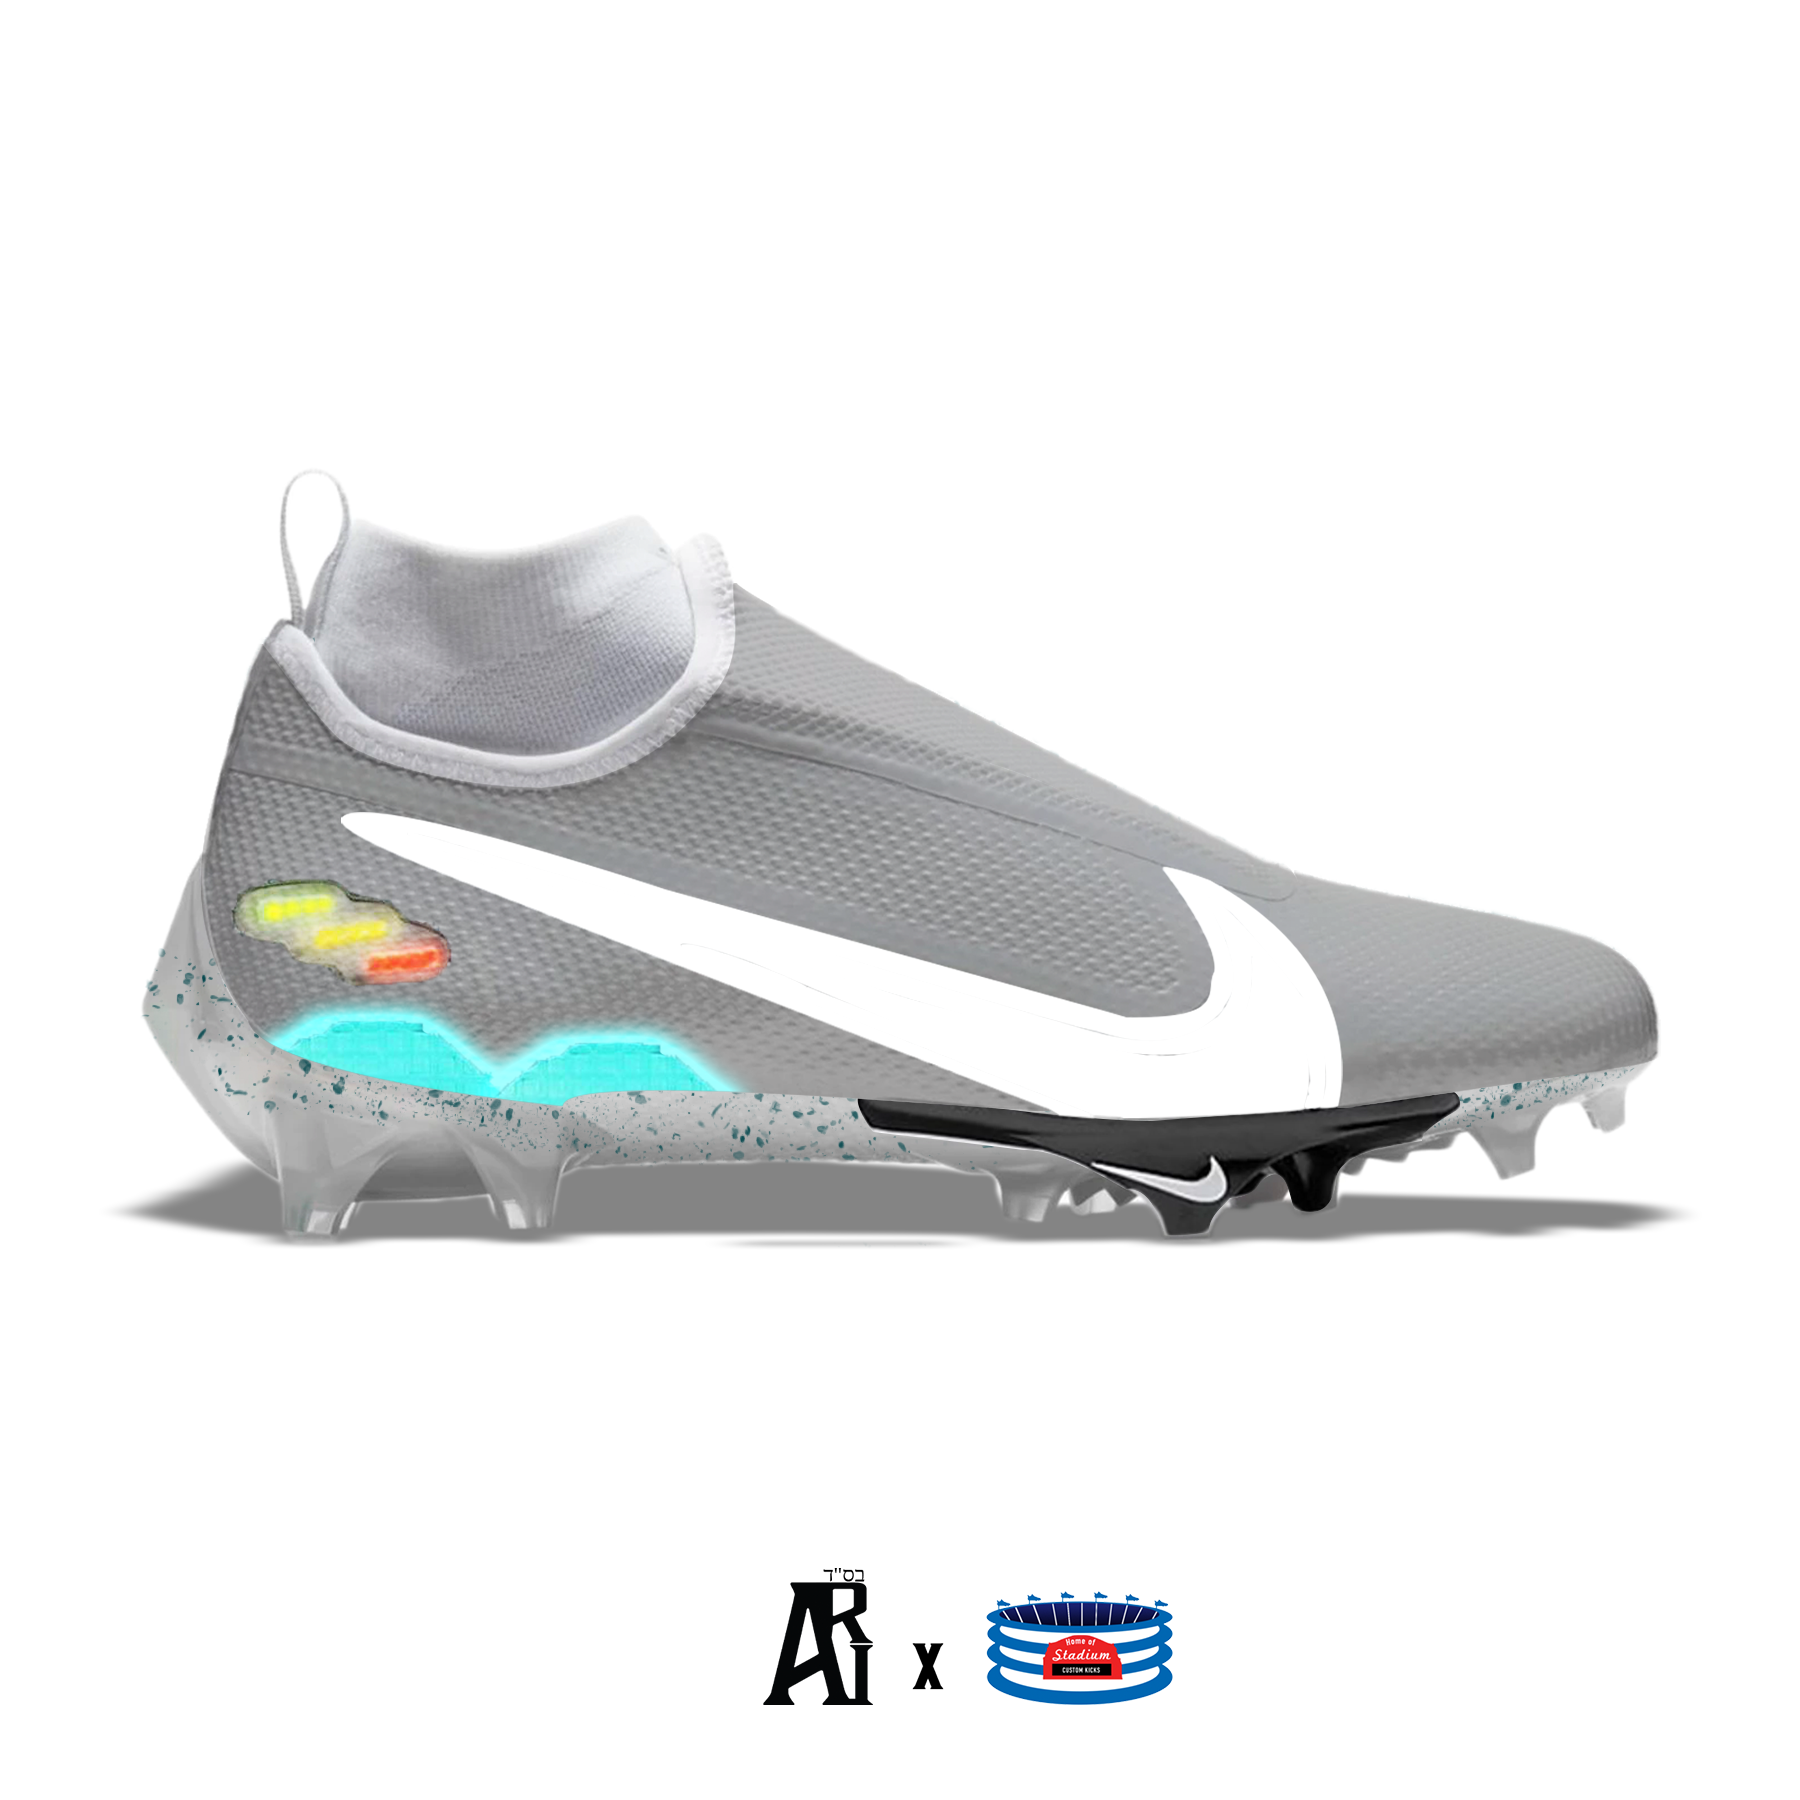 Pin on Soccer cleats nike